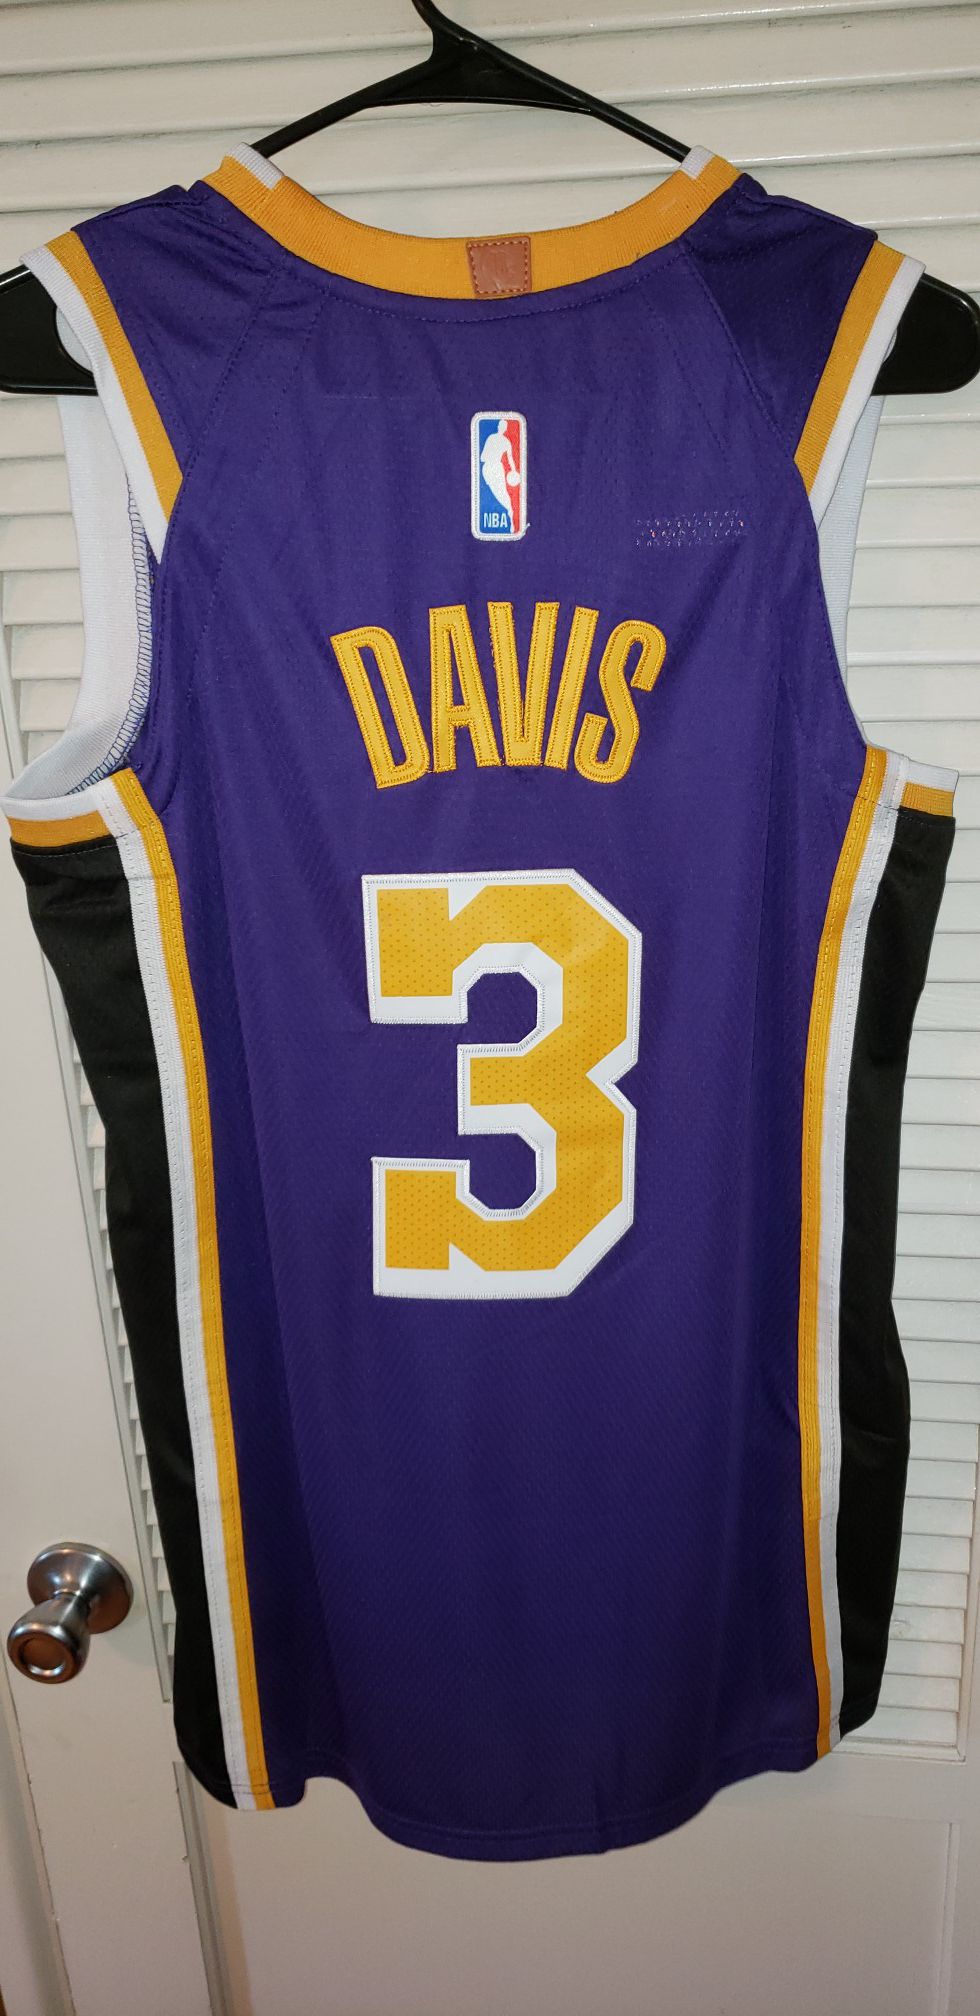 Men's Small Anthony Davis Los Angeles Lakers Jersey New with Tags Stiched Nike $40. Ships +$3. Pick up in West Covina